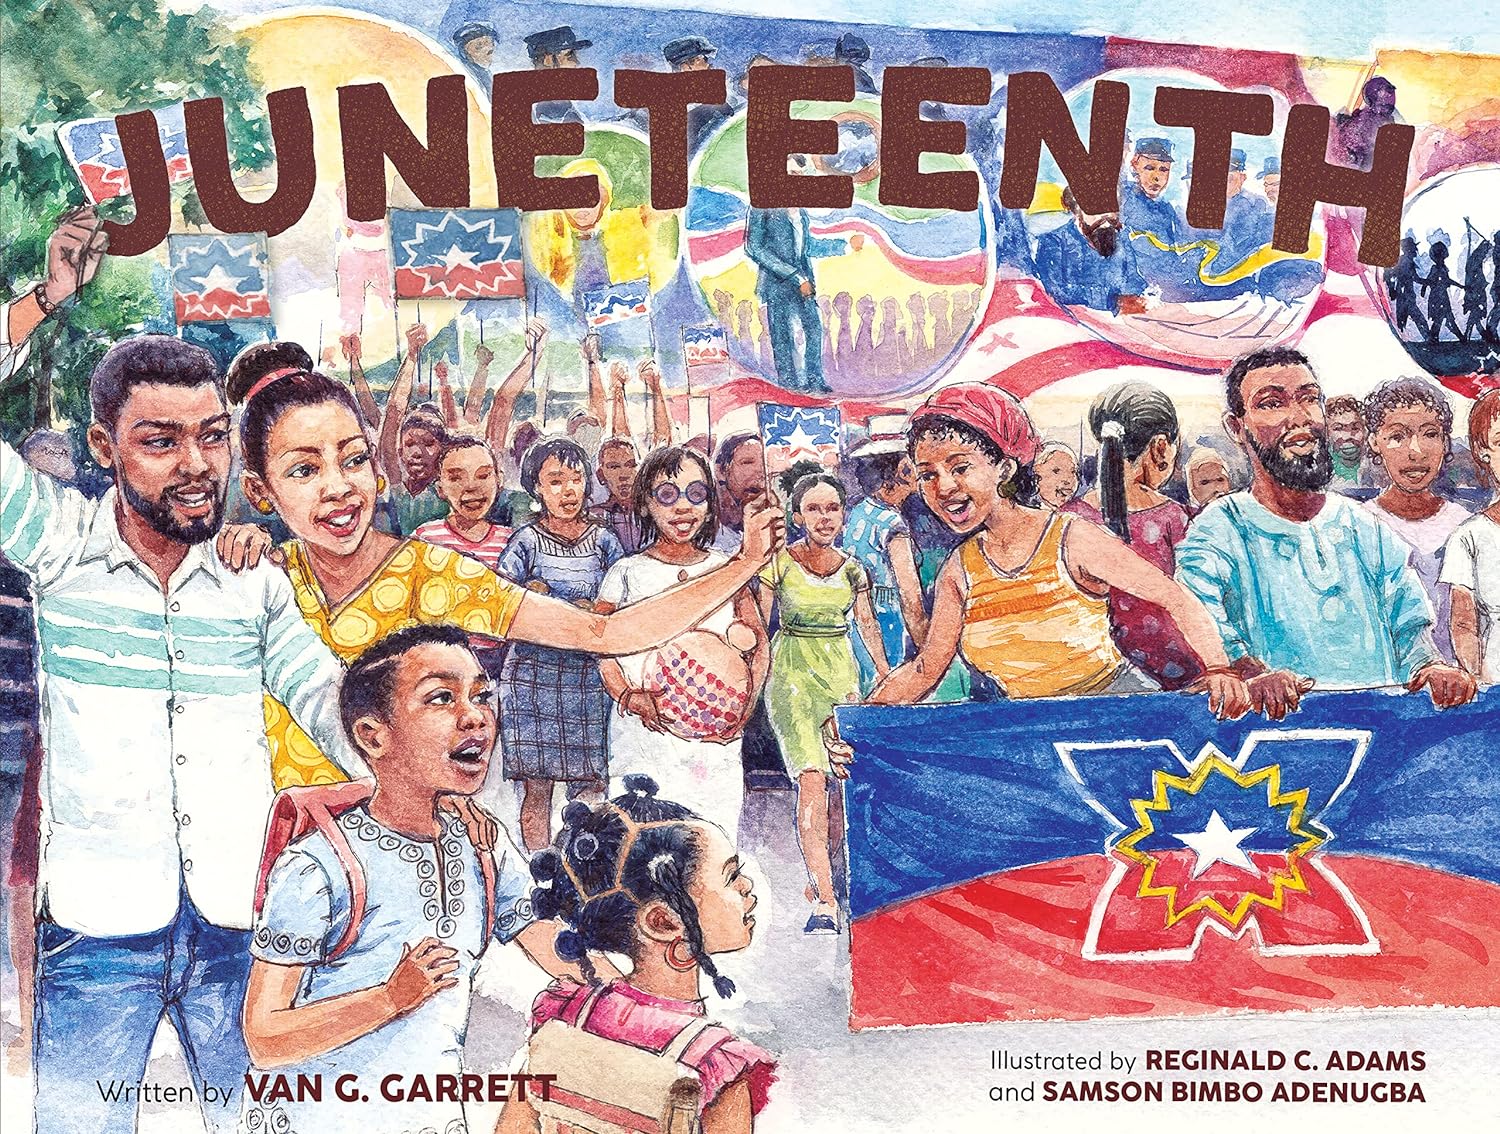 The cover of "juneteenth" by van g. Garrett features a young black boy smiling joyfully amidst a colorful juneteenth parade in galveston, texas. He is surrounded by vibrant floats, balloons, and banners celebrating freedom. The background includes festive crowds and historic buildings under a bright, sunny sky. The title "juneteenth" is prominently displayed in bold letters at the top, encapsulating the spirit of celebration and heritage about the significance of juneteenth.